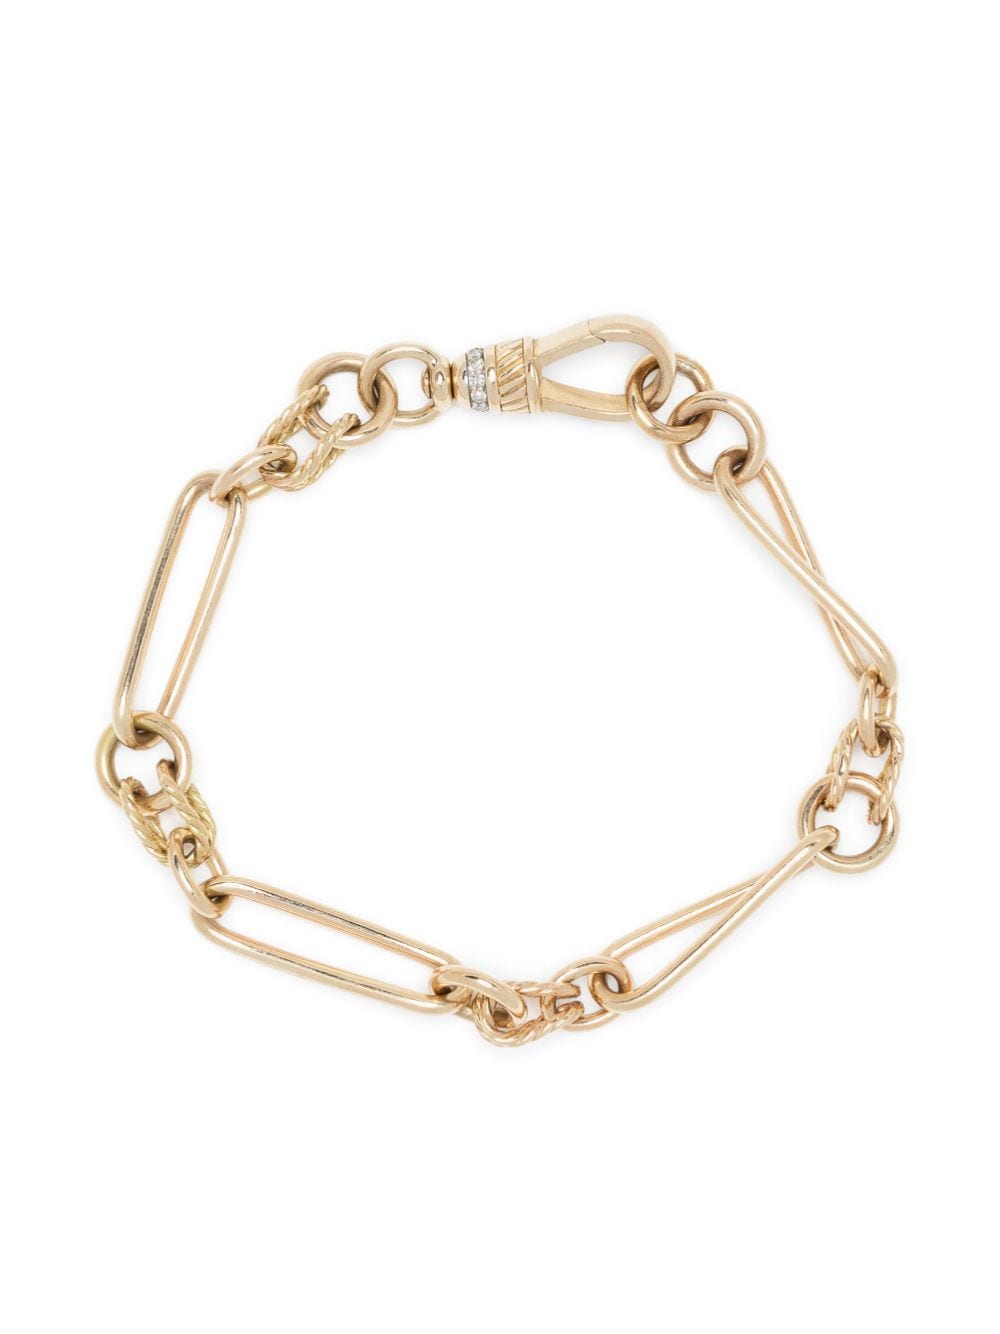 Lucy Delius Jewellery 14kt yellow gold Twisted bracelet von Lucy Delius Jewellery